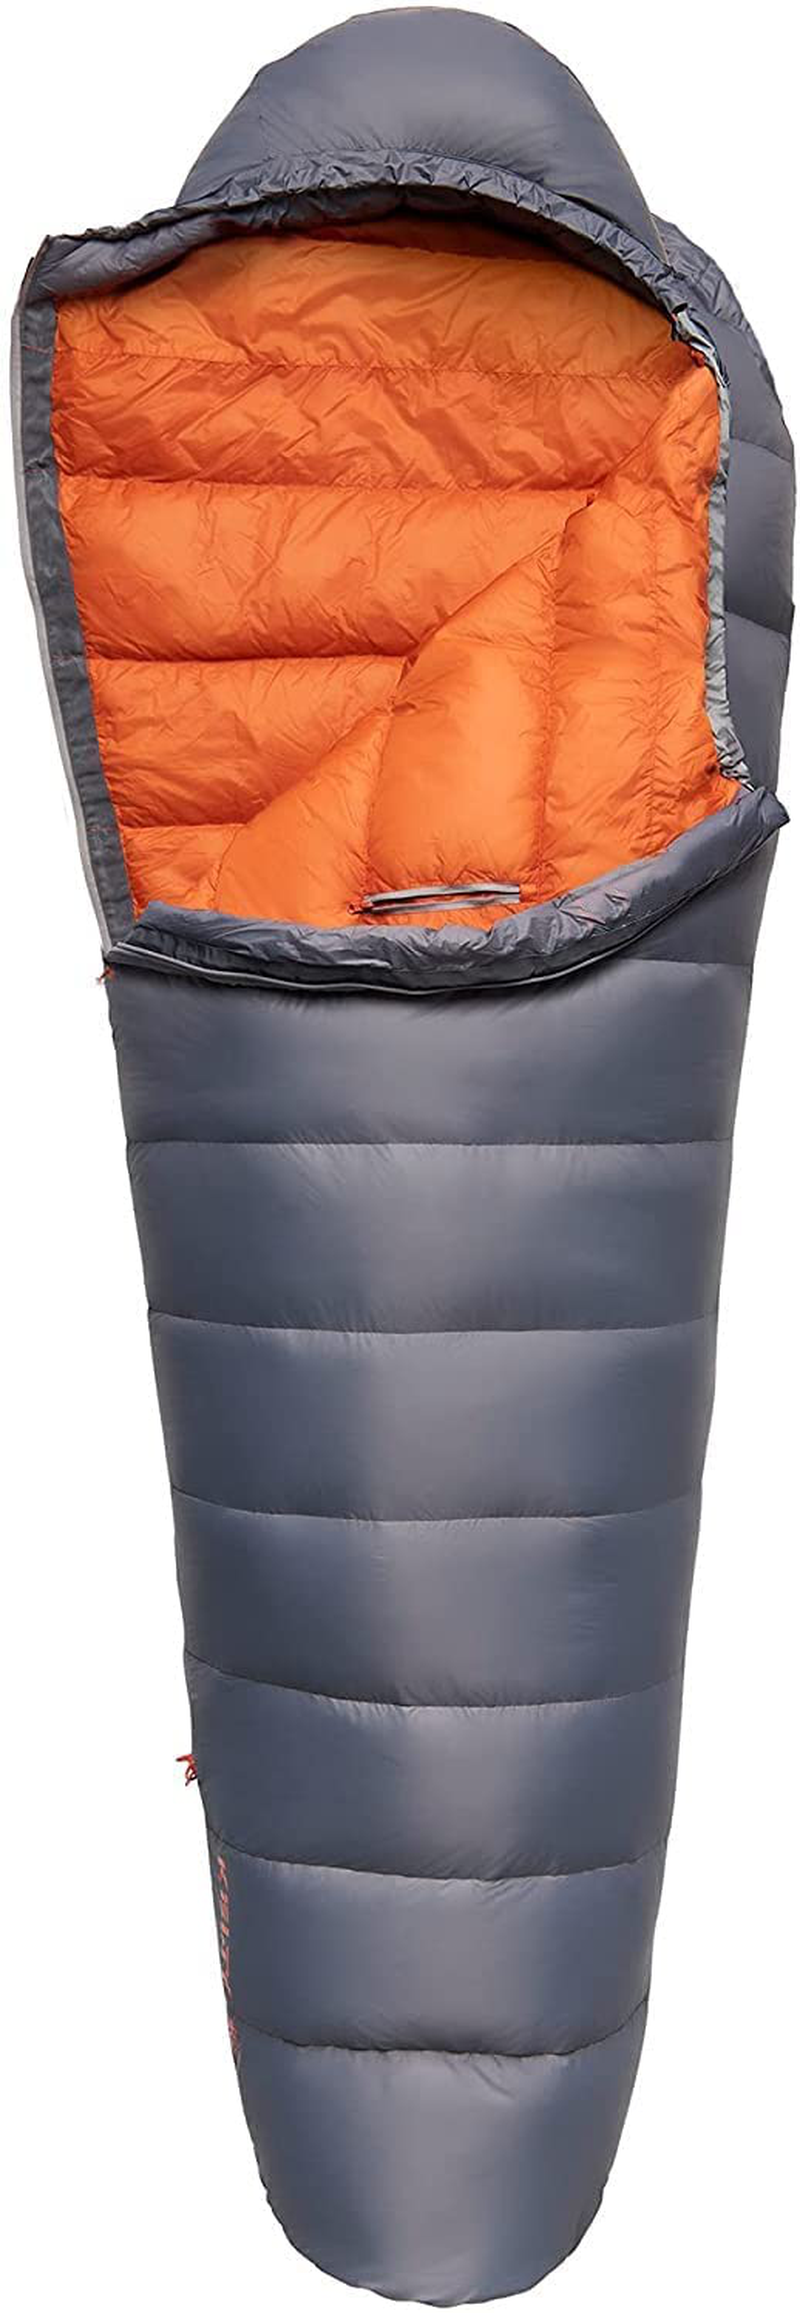 HOUXIAN Mummy Sleeping Bag Compact, 0 Degree Fill Power Hydrophobic Goose down Sleeping Bag with Base - Ultra Lightweight 4 Season Camping, Hiking, Traveling, Backpacking and Outdoor